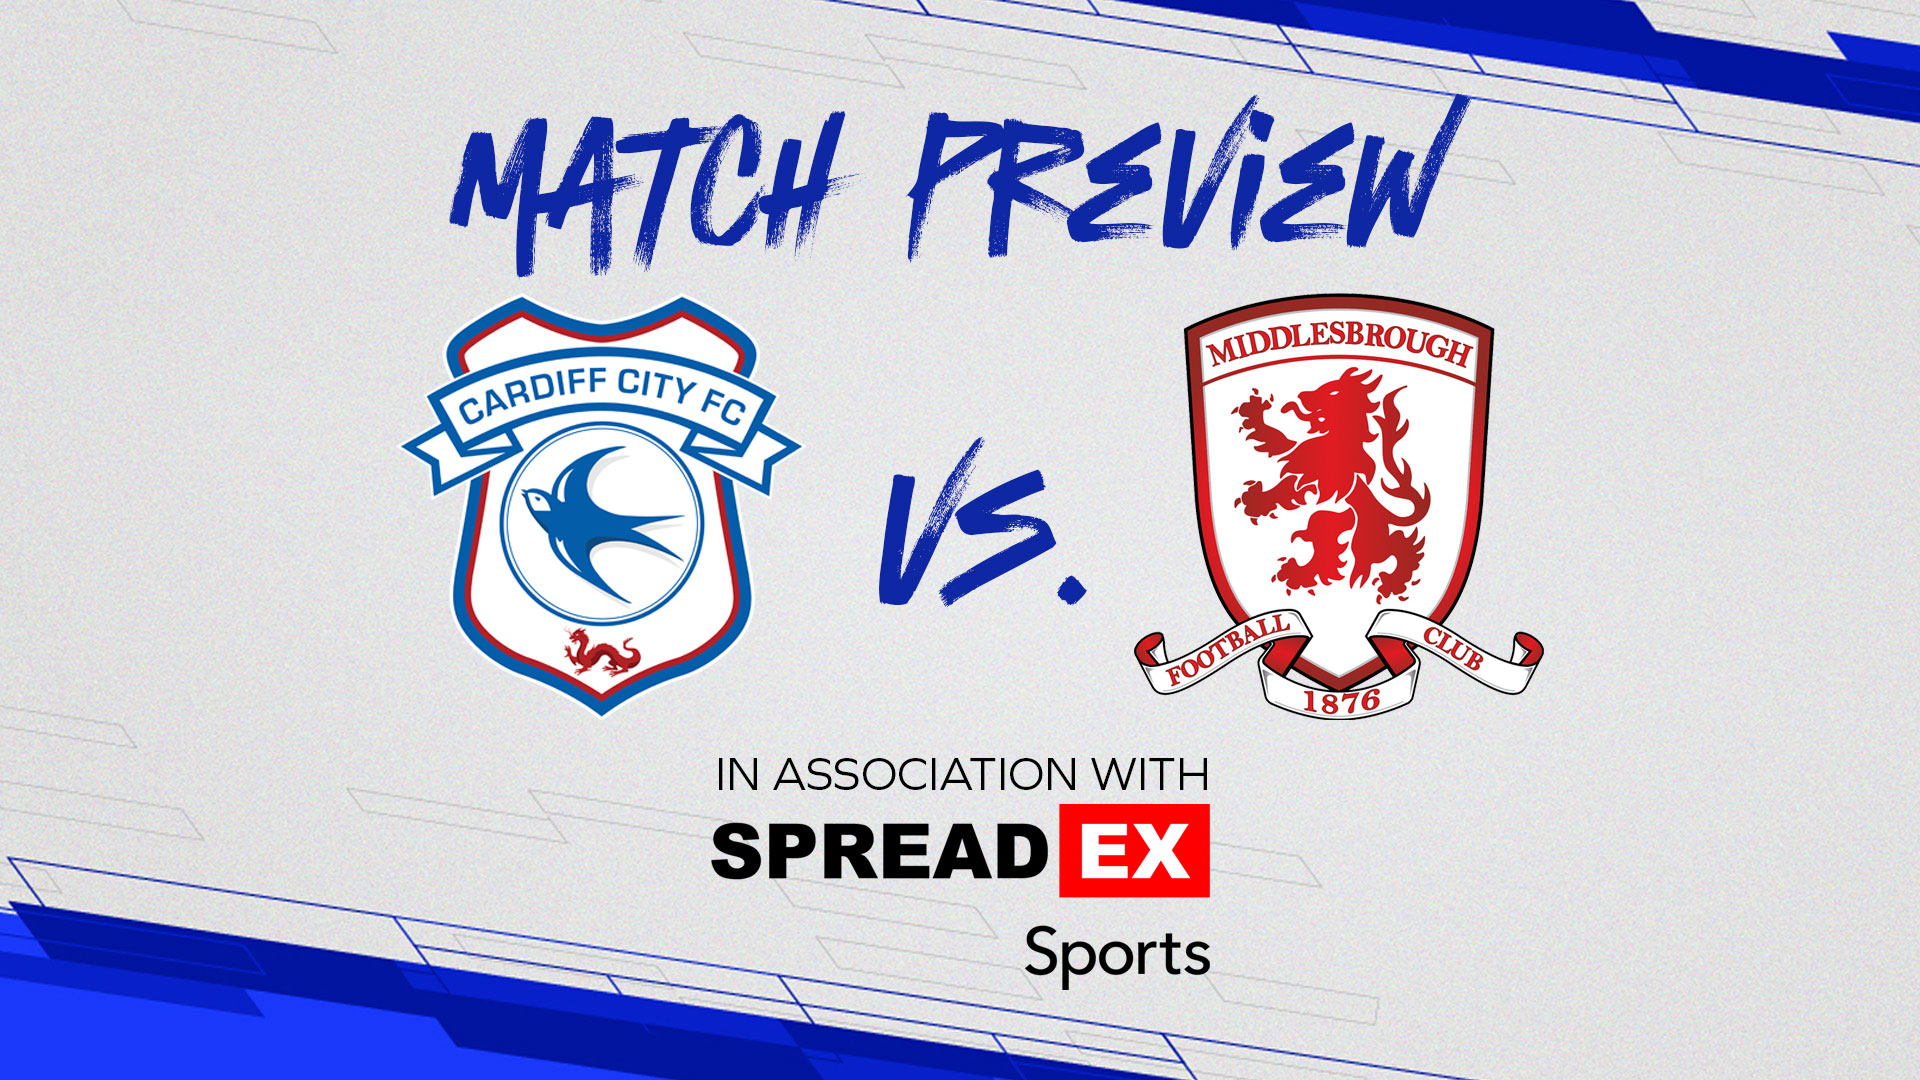 Match Preview: Cardiff City vs. Middlesbrough